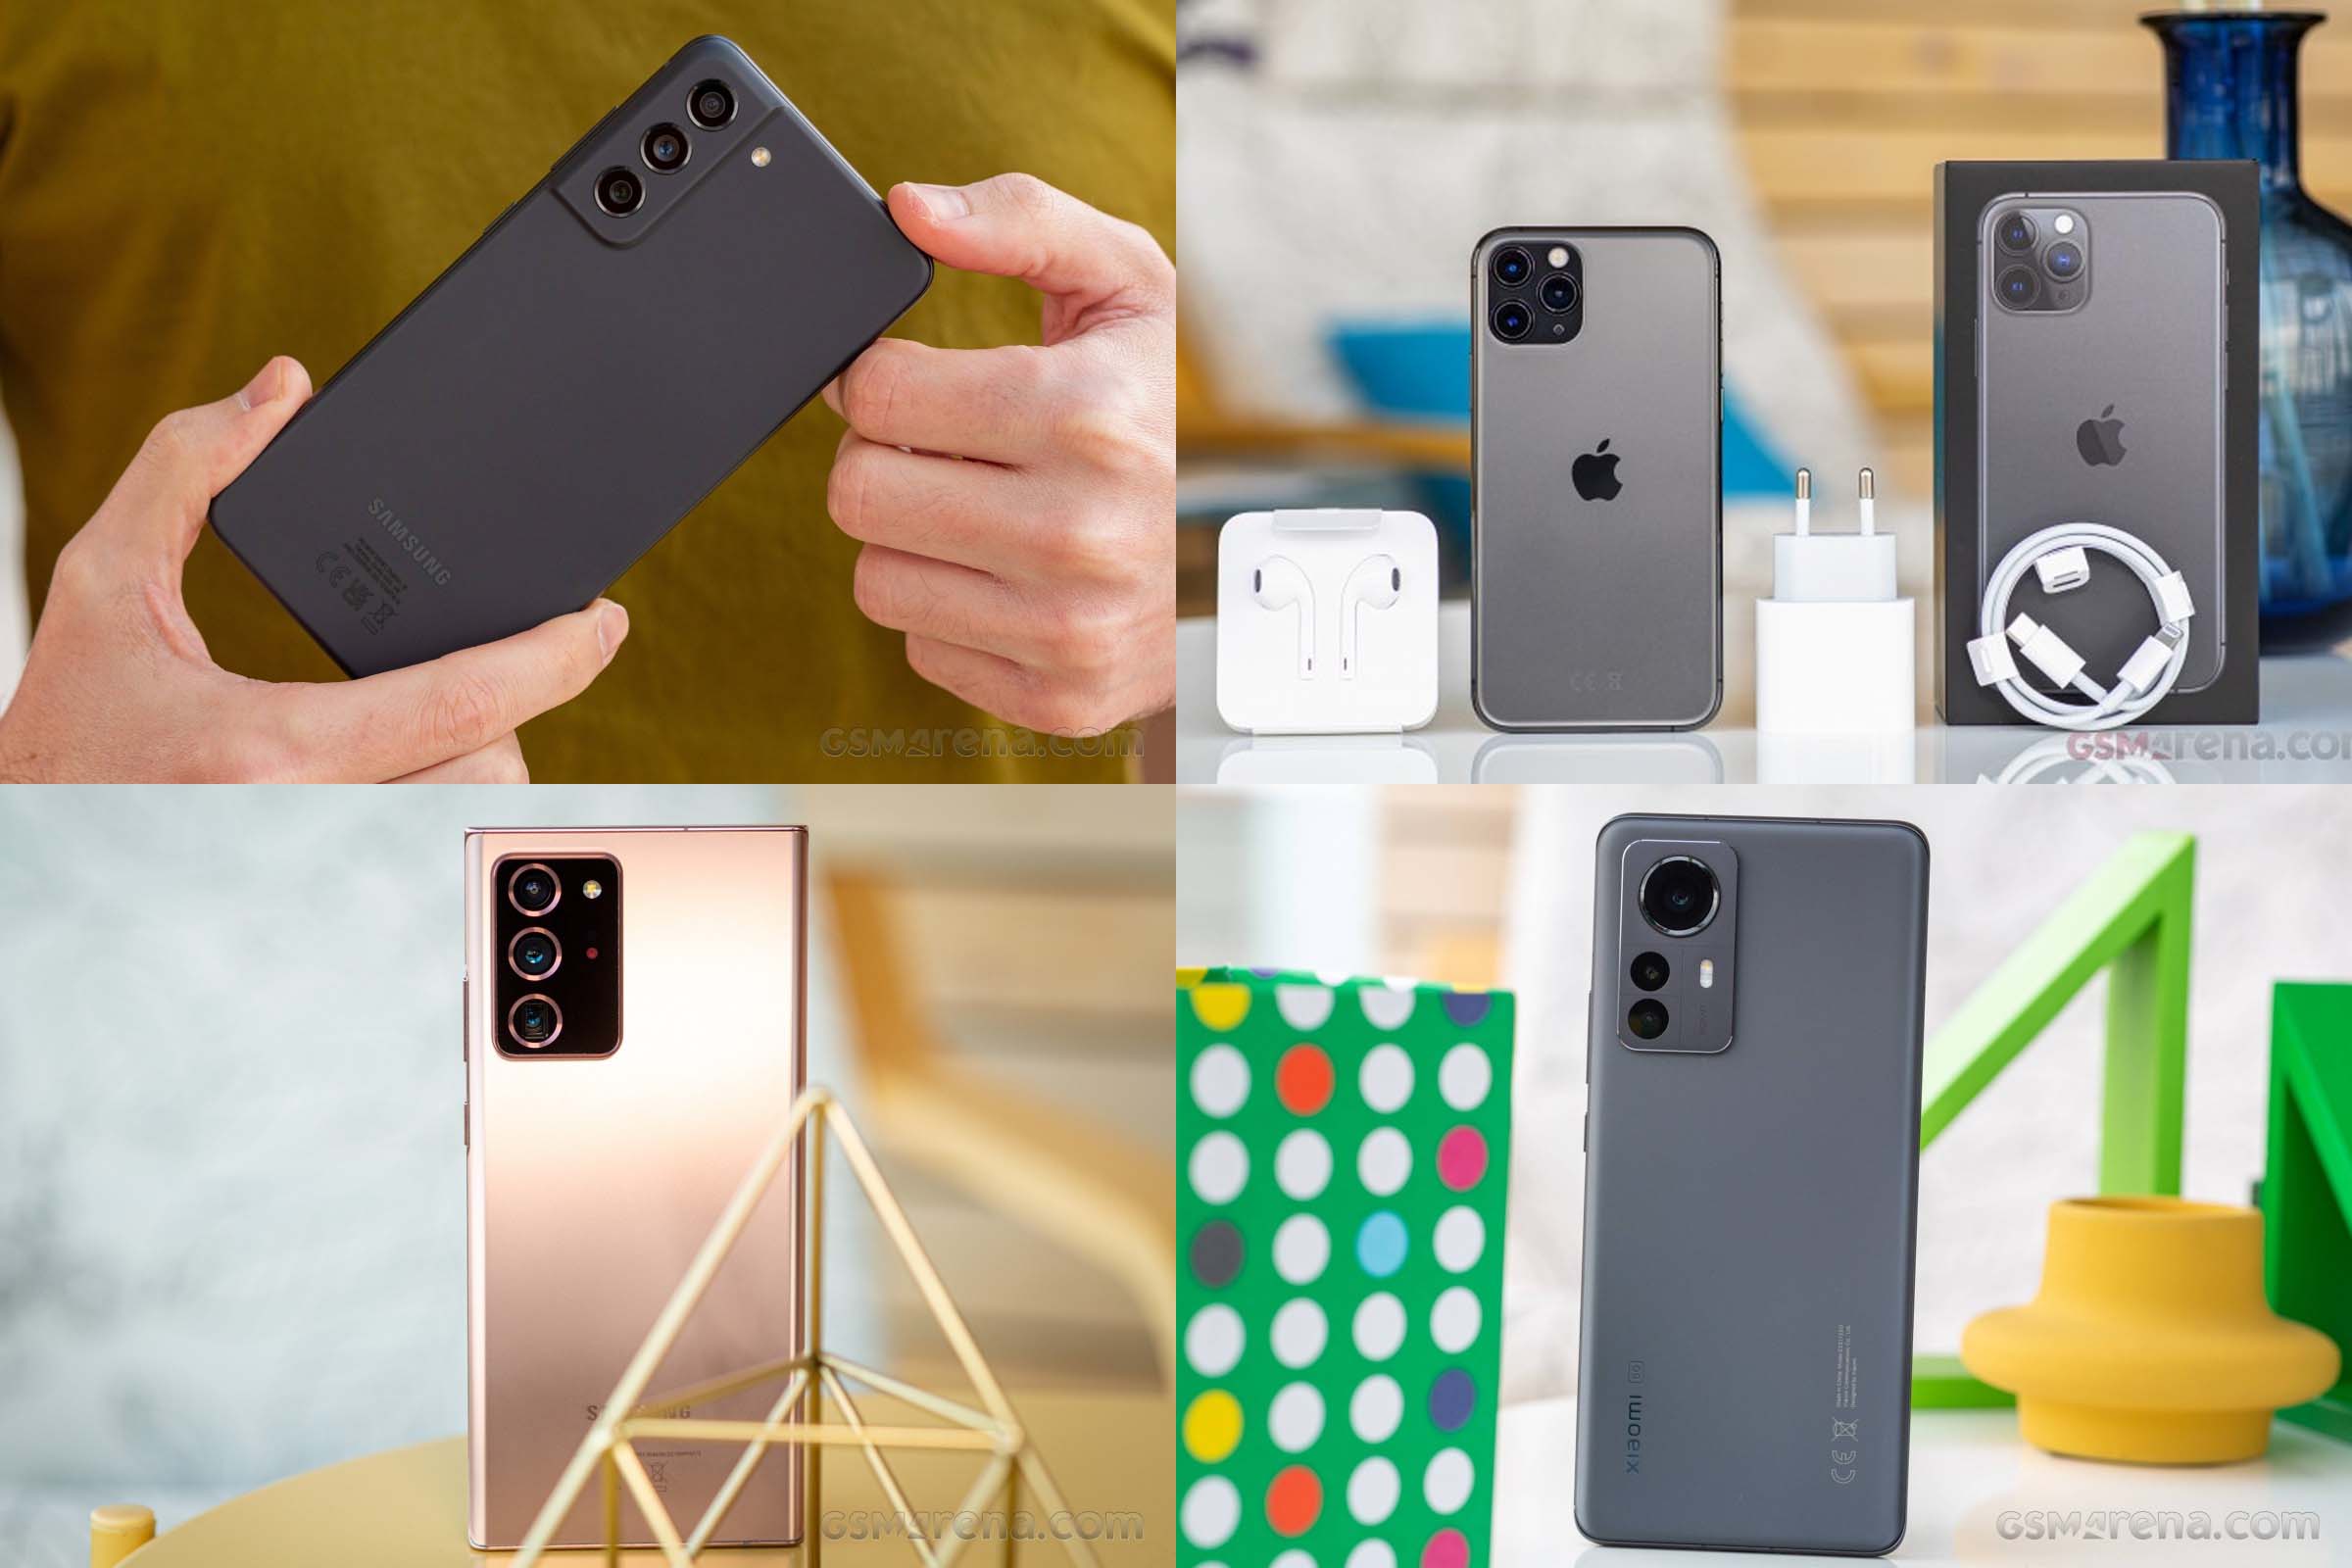 Technology news at noon August 29: Galaxy S21 FE is unbelievably cheap, iPhone 11 Pro is just over 9 million, Xiaomi 12 Pro drops